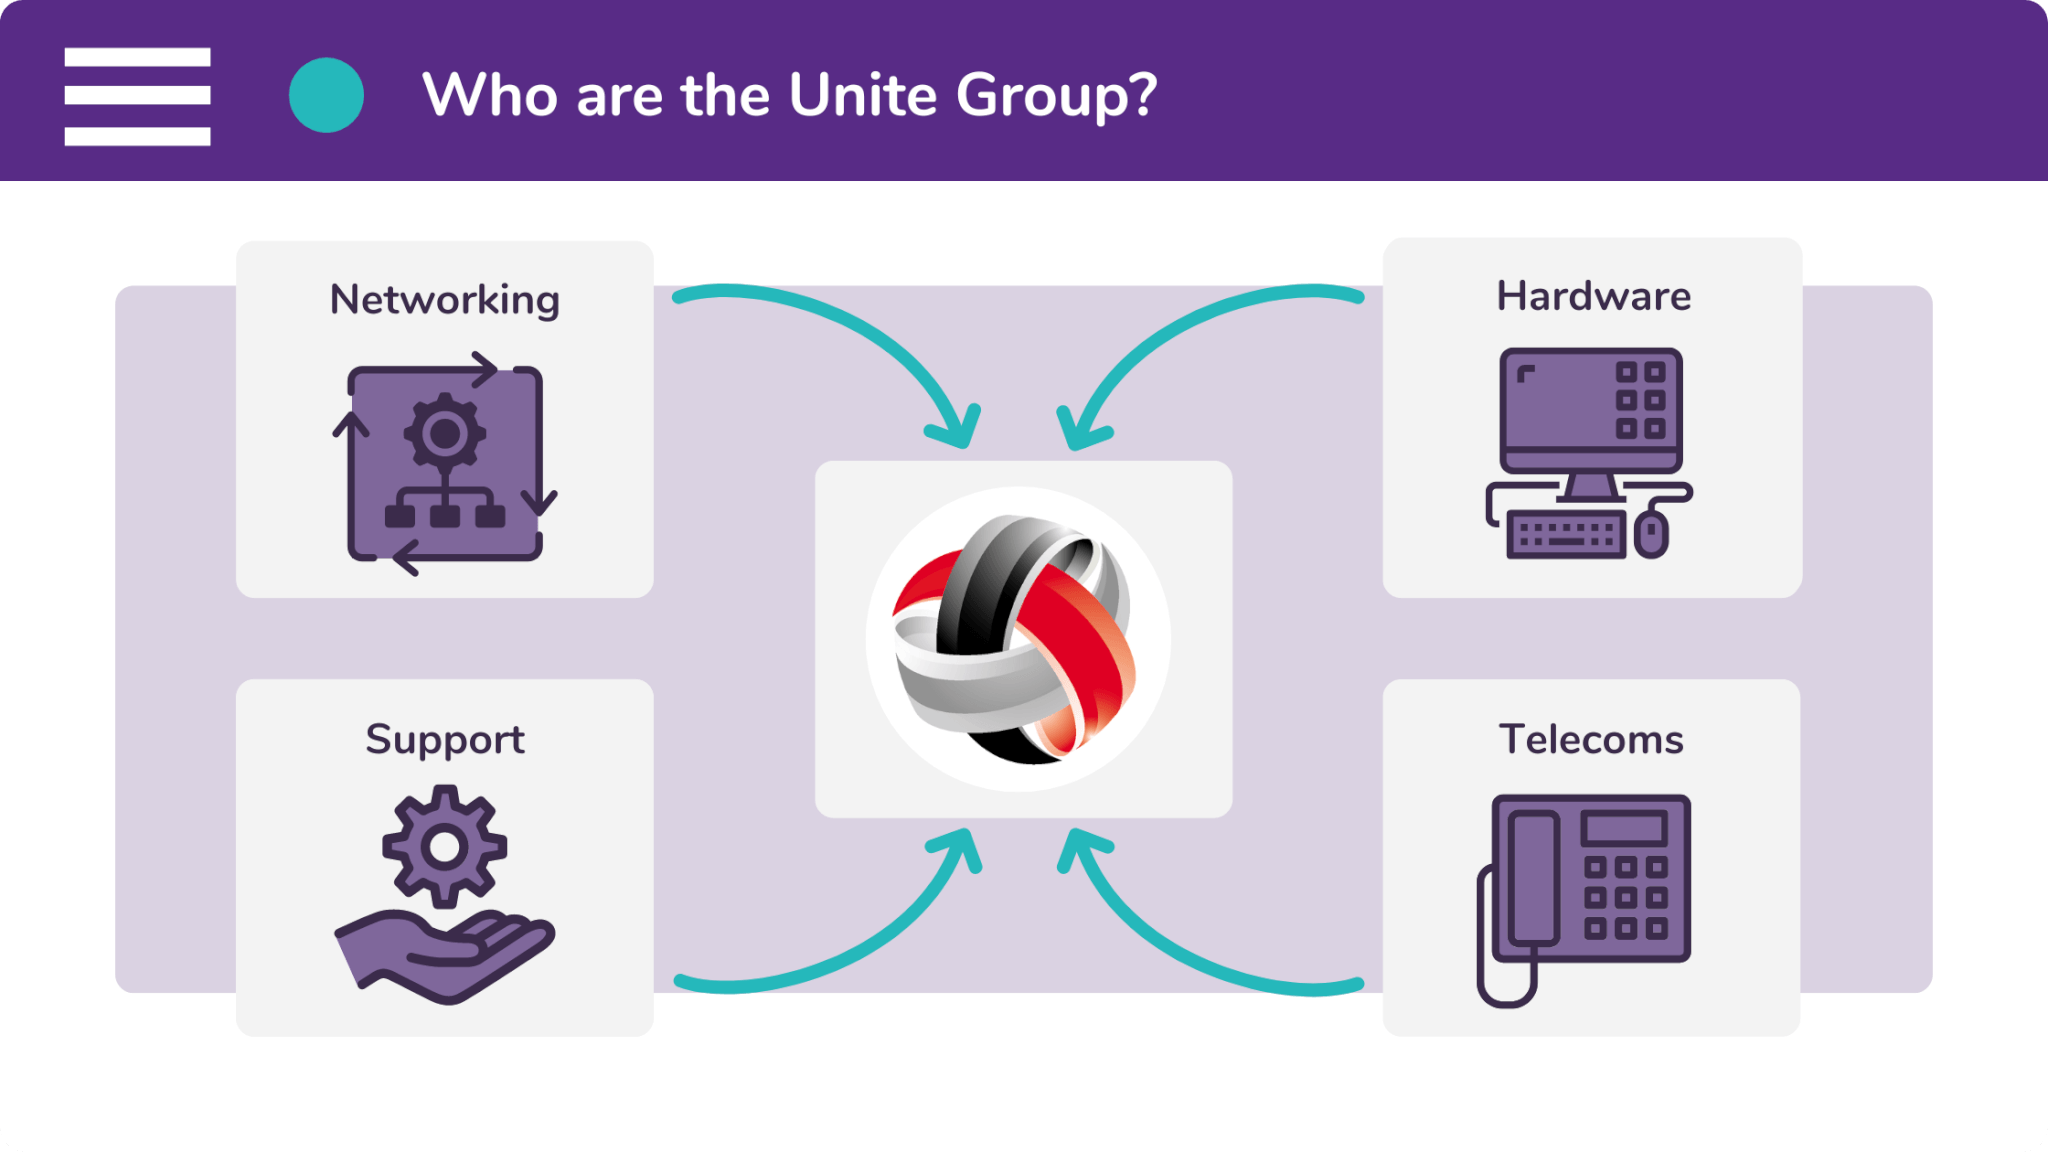 The Unite Group are an IT and telecommunications provider, based in the North East of England.